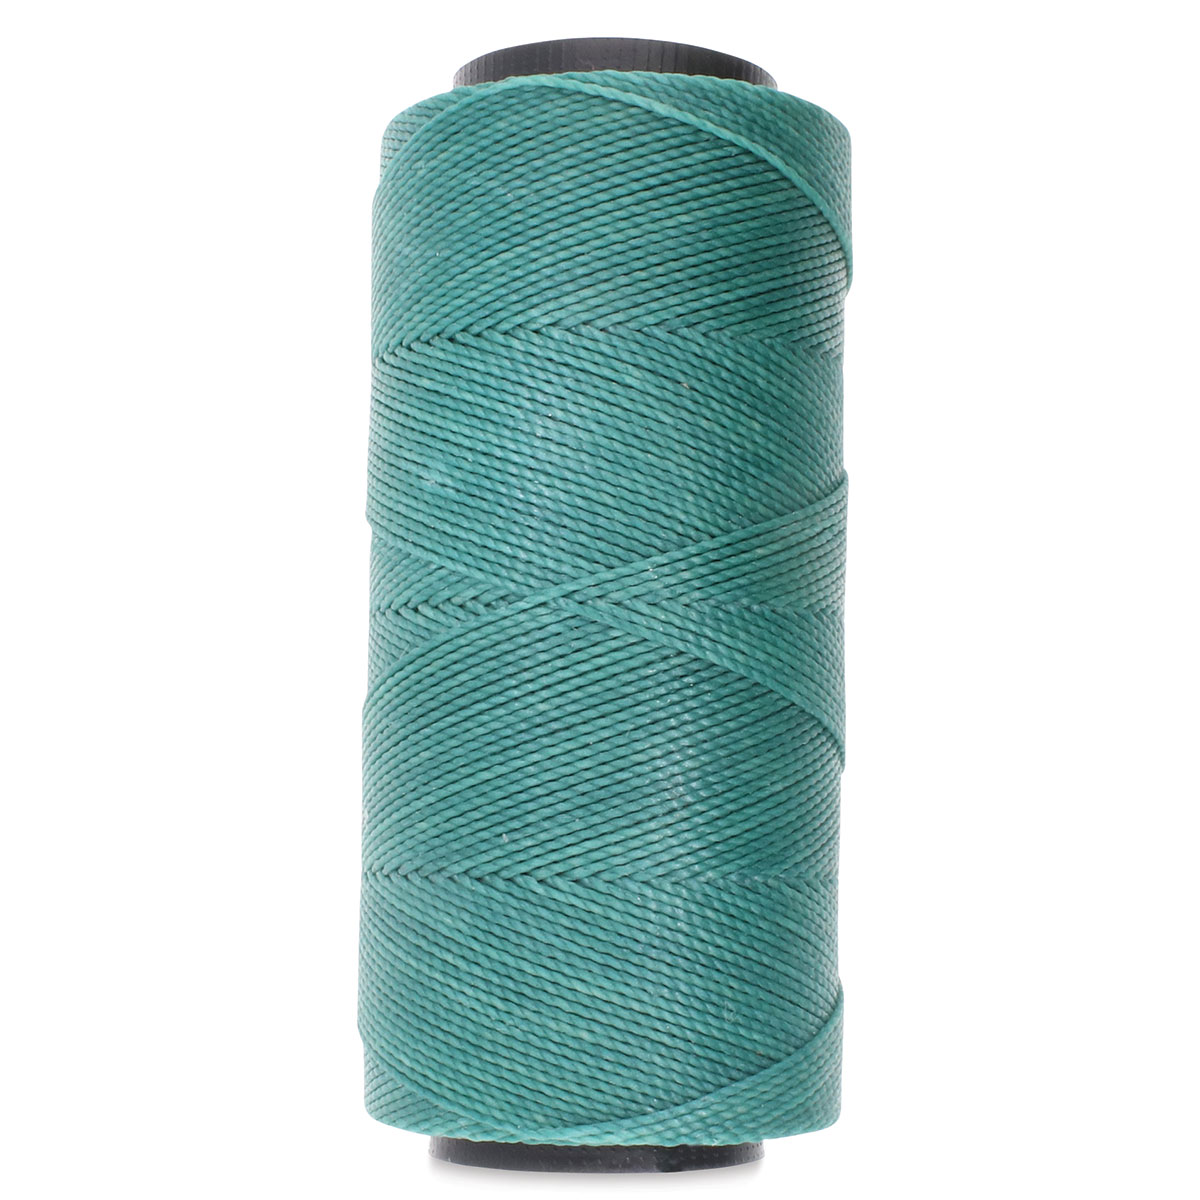 Knot It Waxed Brazilian Polyester Cord HANG LOOSE